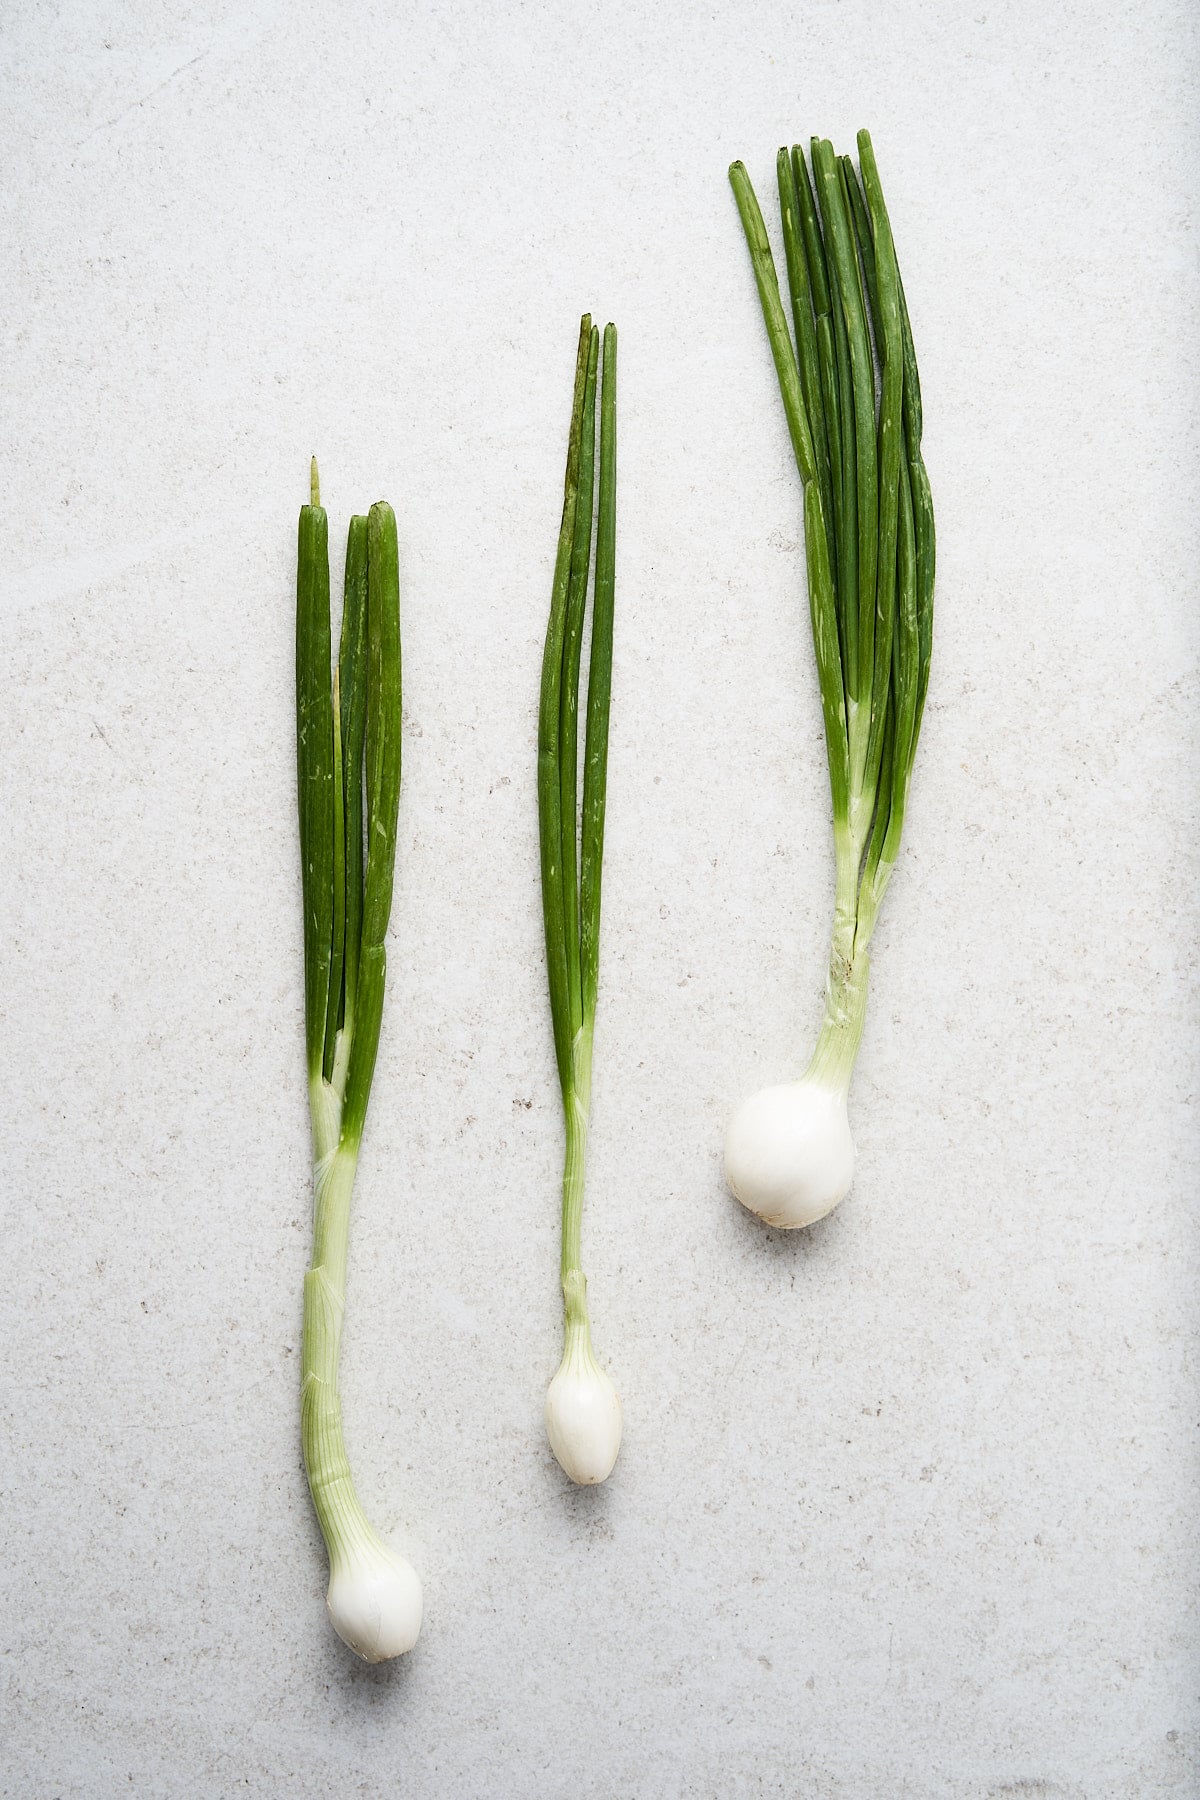 Green onions laying on a counter